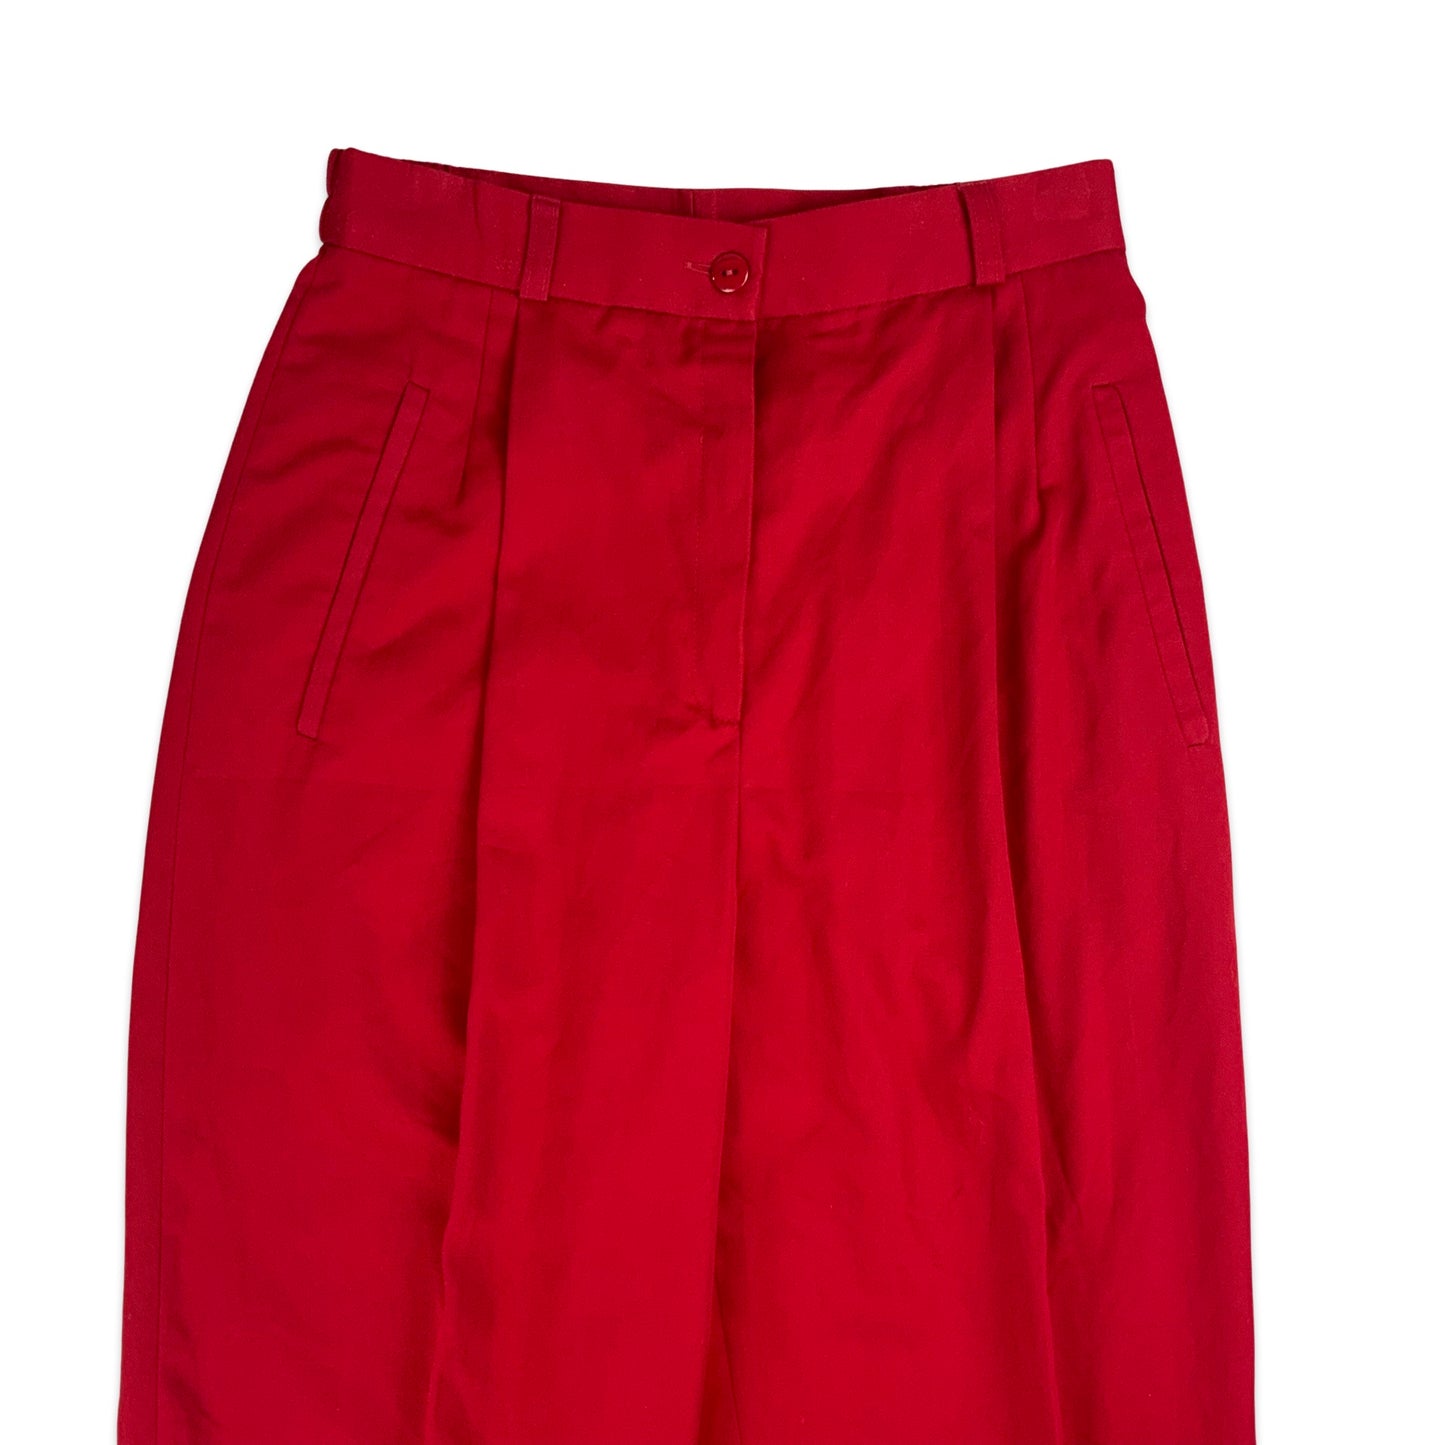 Vintage Red Straight Leg Trousers 6 8